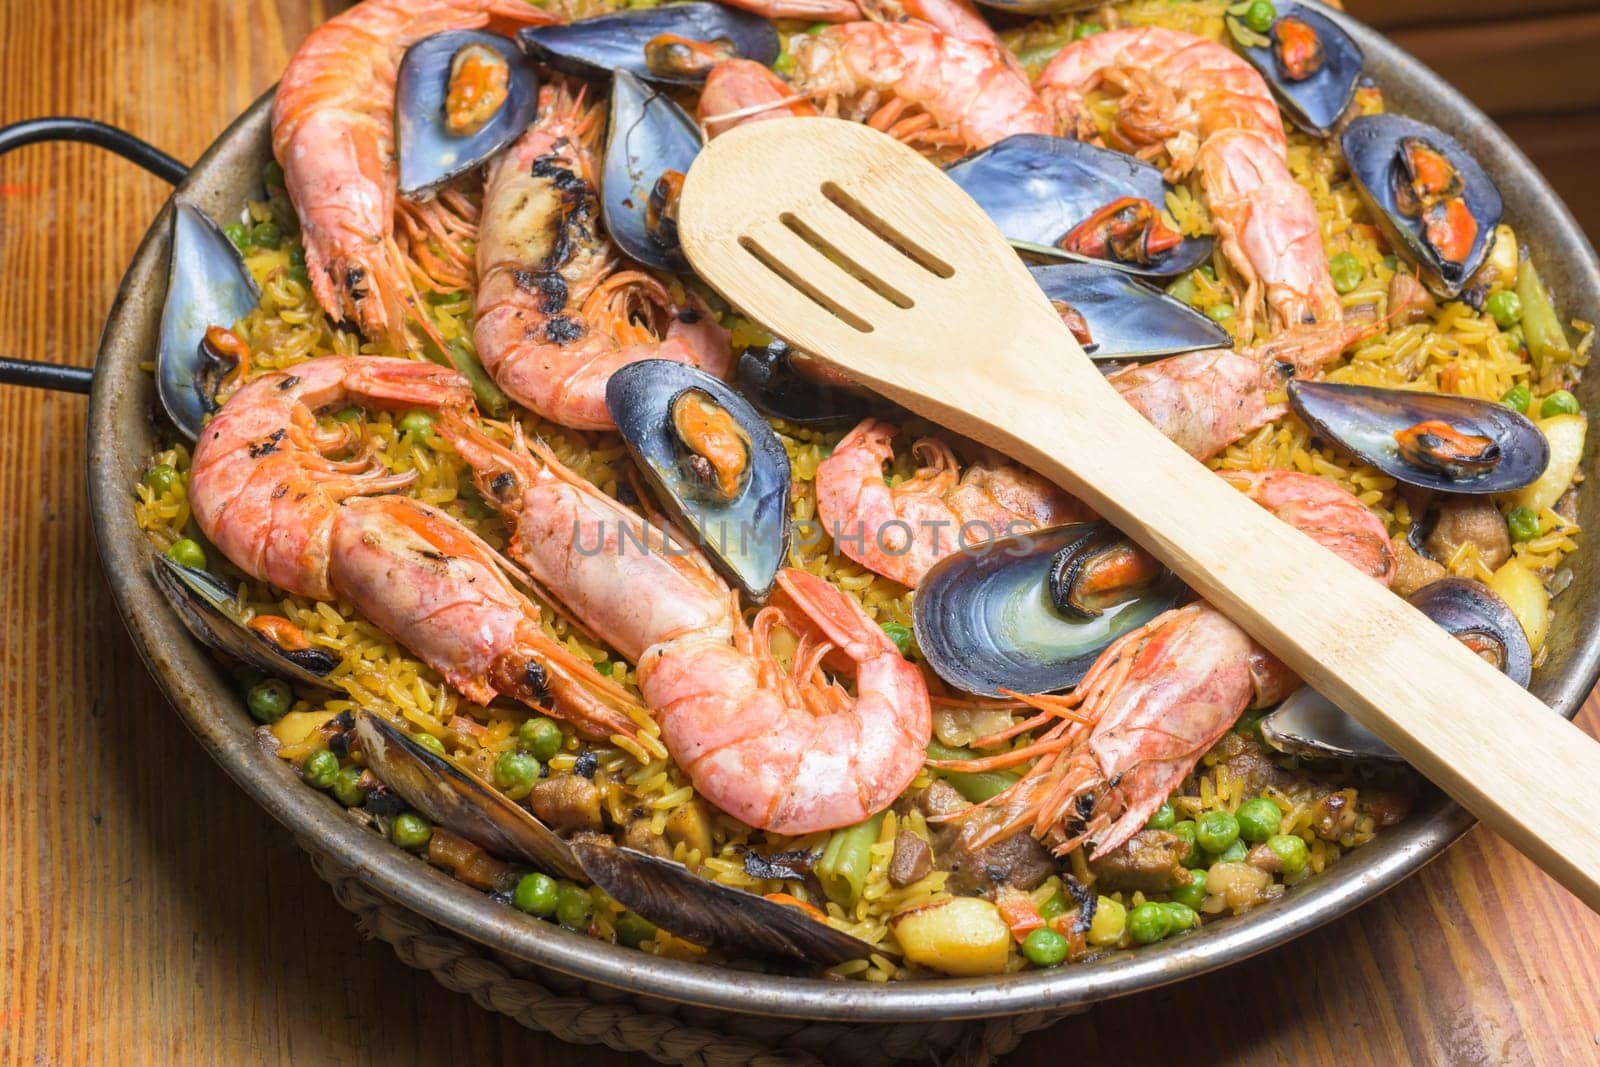 A paella full of seafood, peas, and rice served in a pan with a wooden spoon, typical Spanish cuisine, Majorca, Balearic Islands, Spain by carlosviv